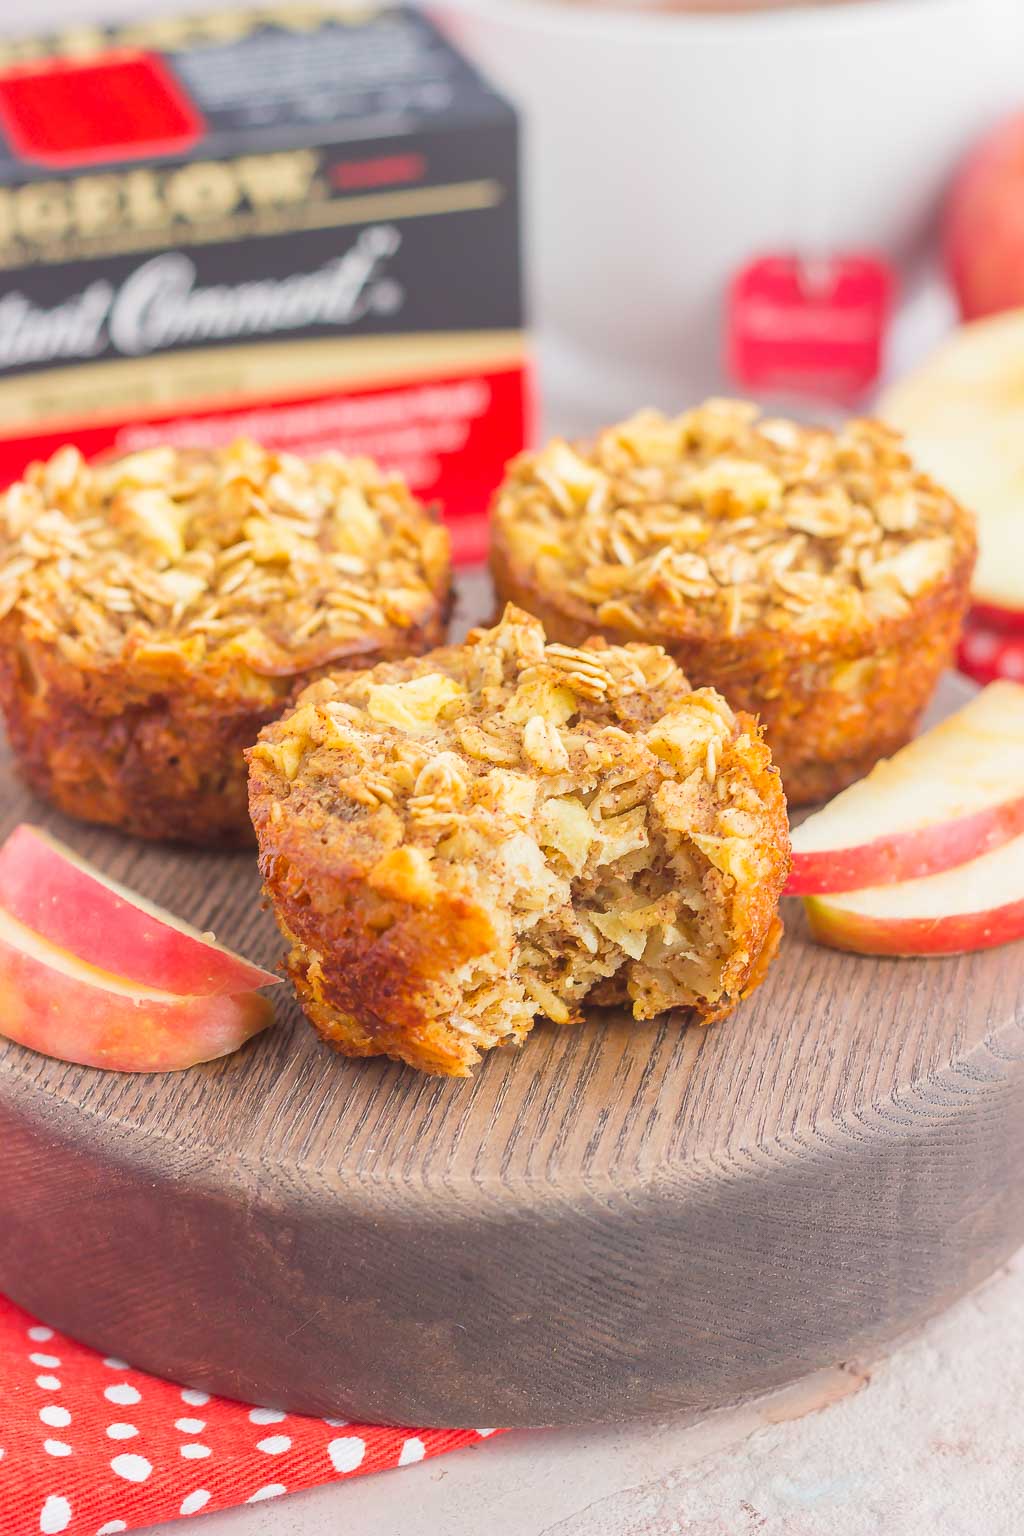 three baked oatmeal cups on a wood platter, the front one has a bite missing